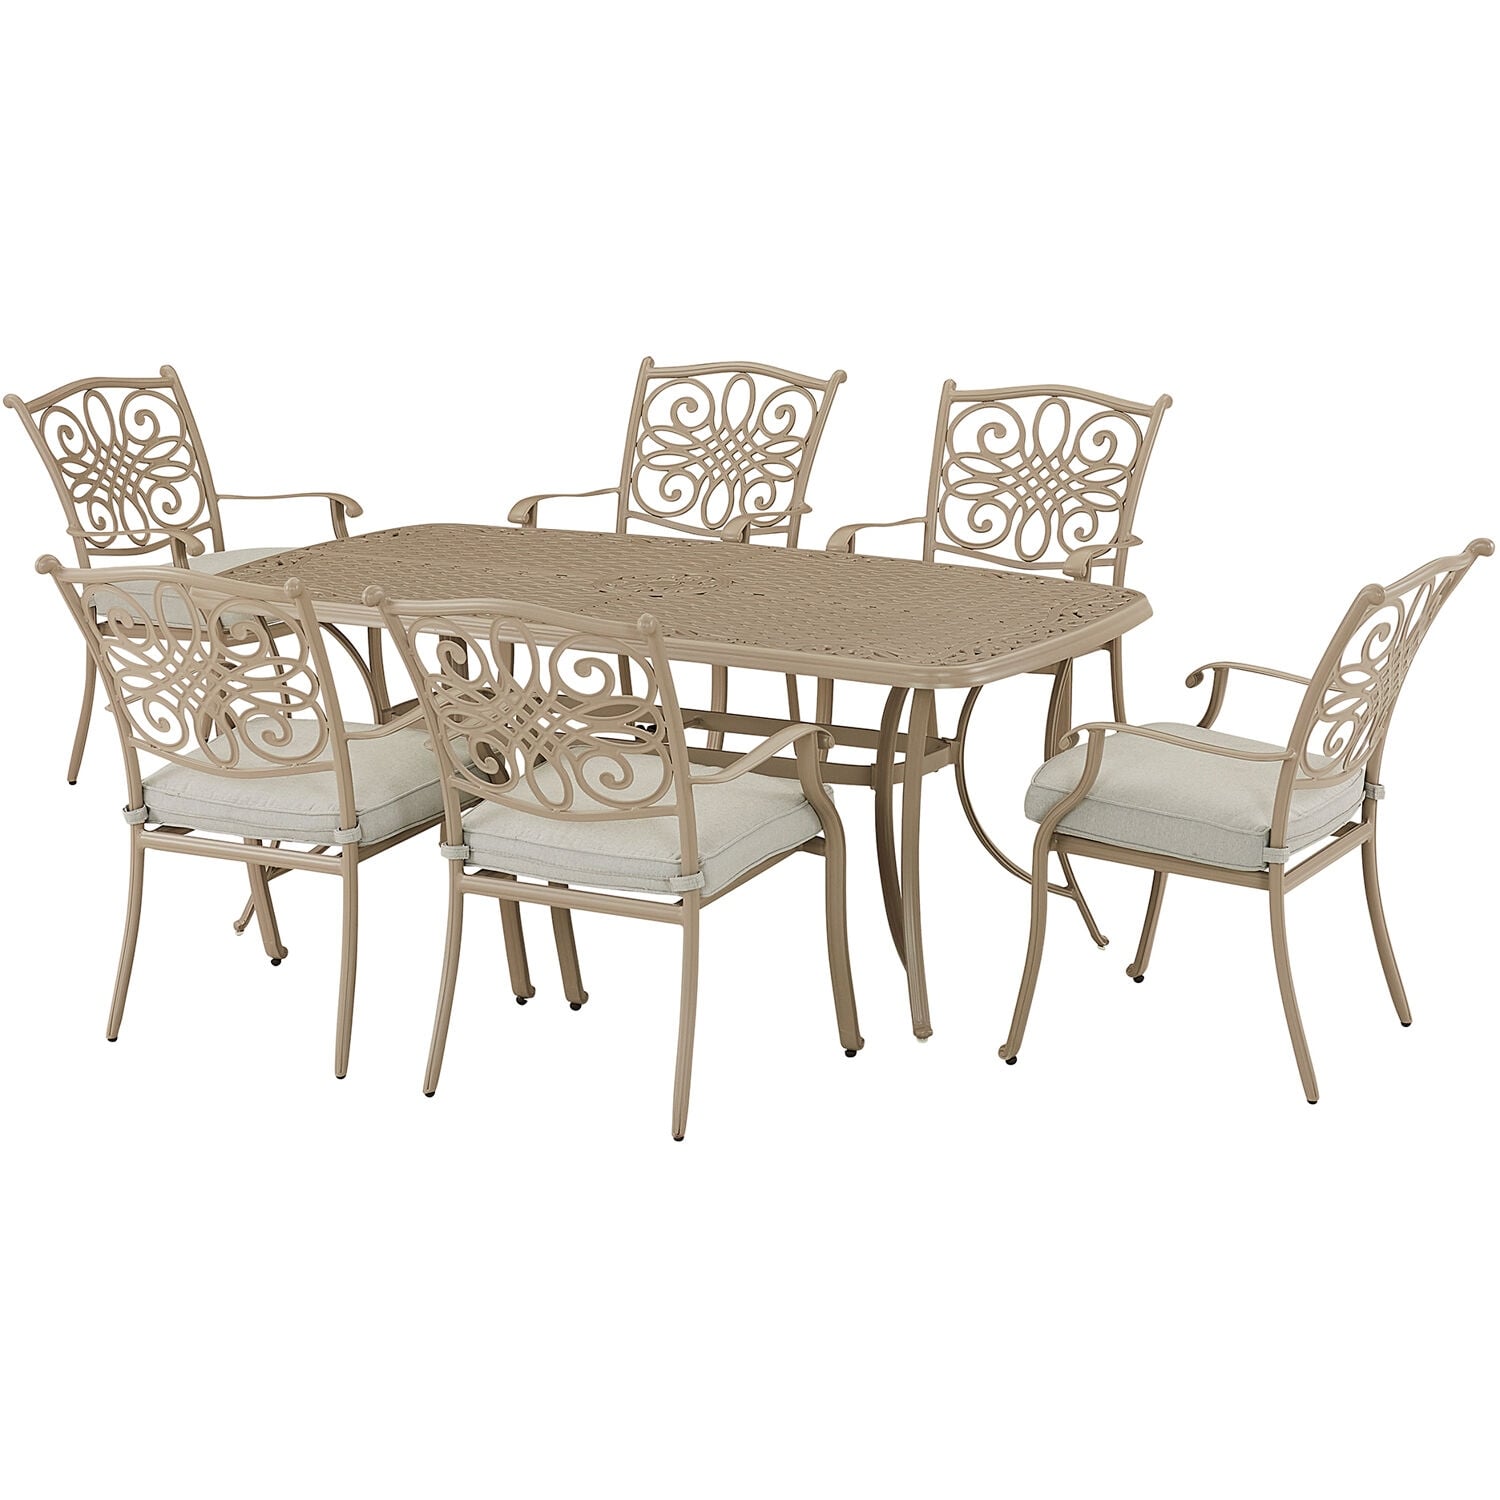 Hanover Traditions 7-piece Dining Set With 6 Stationary Chairs And 38-in. X 72-in. Cast-top Table  Sand Finish